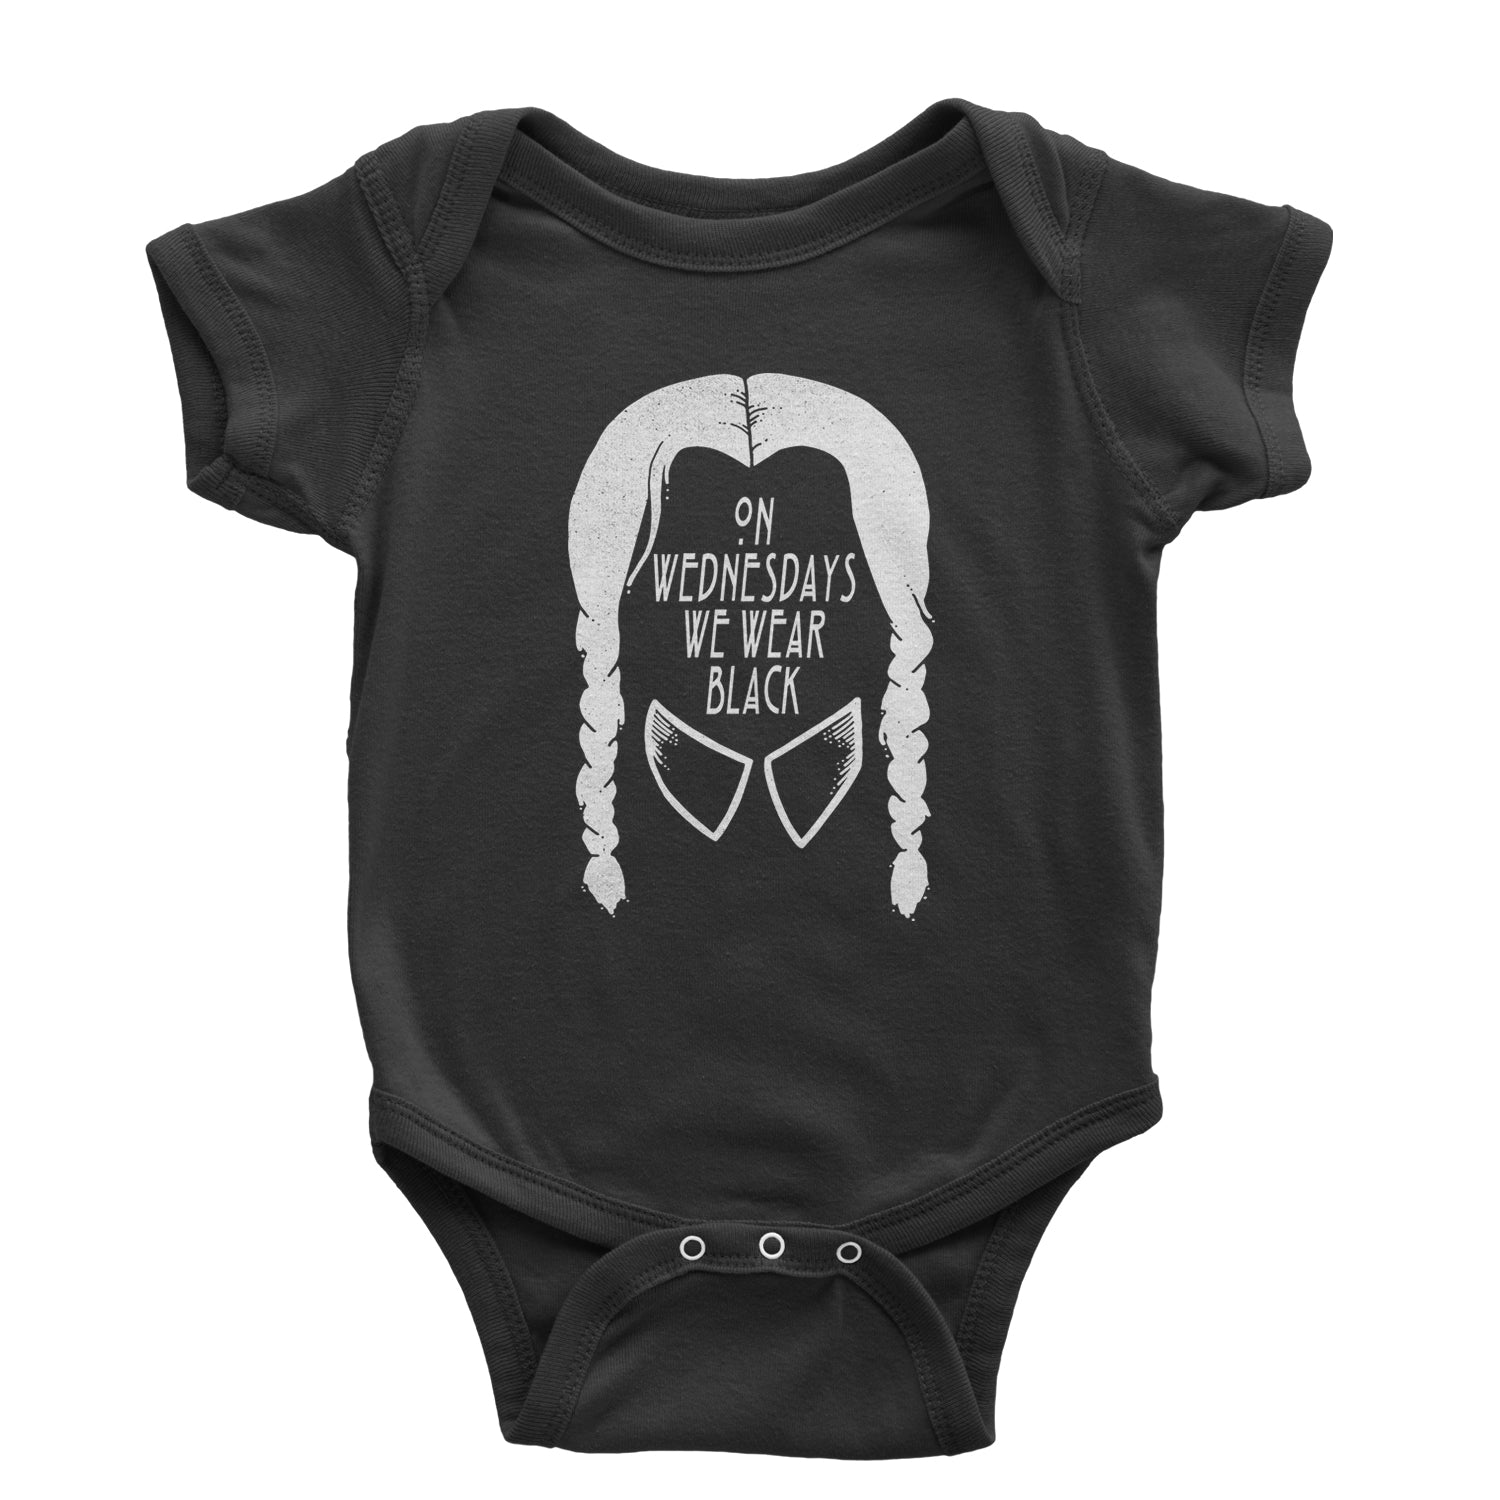 On Wednesdays, We Wear Black Infant One-Piece Romper Bodysuit and Toddler T-shirt addams, family, gomez, morticia, pugsly, ricci, Wednesday by Expression Tees